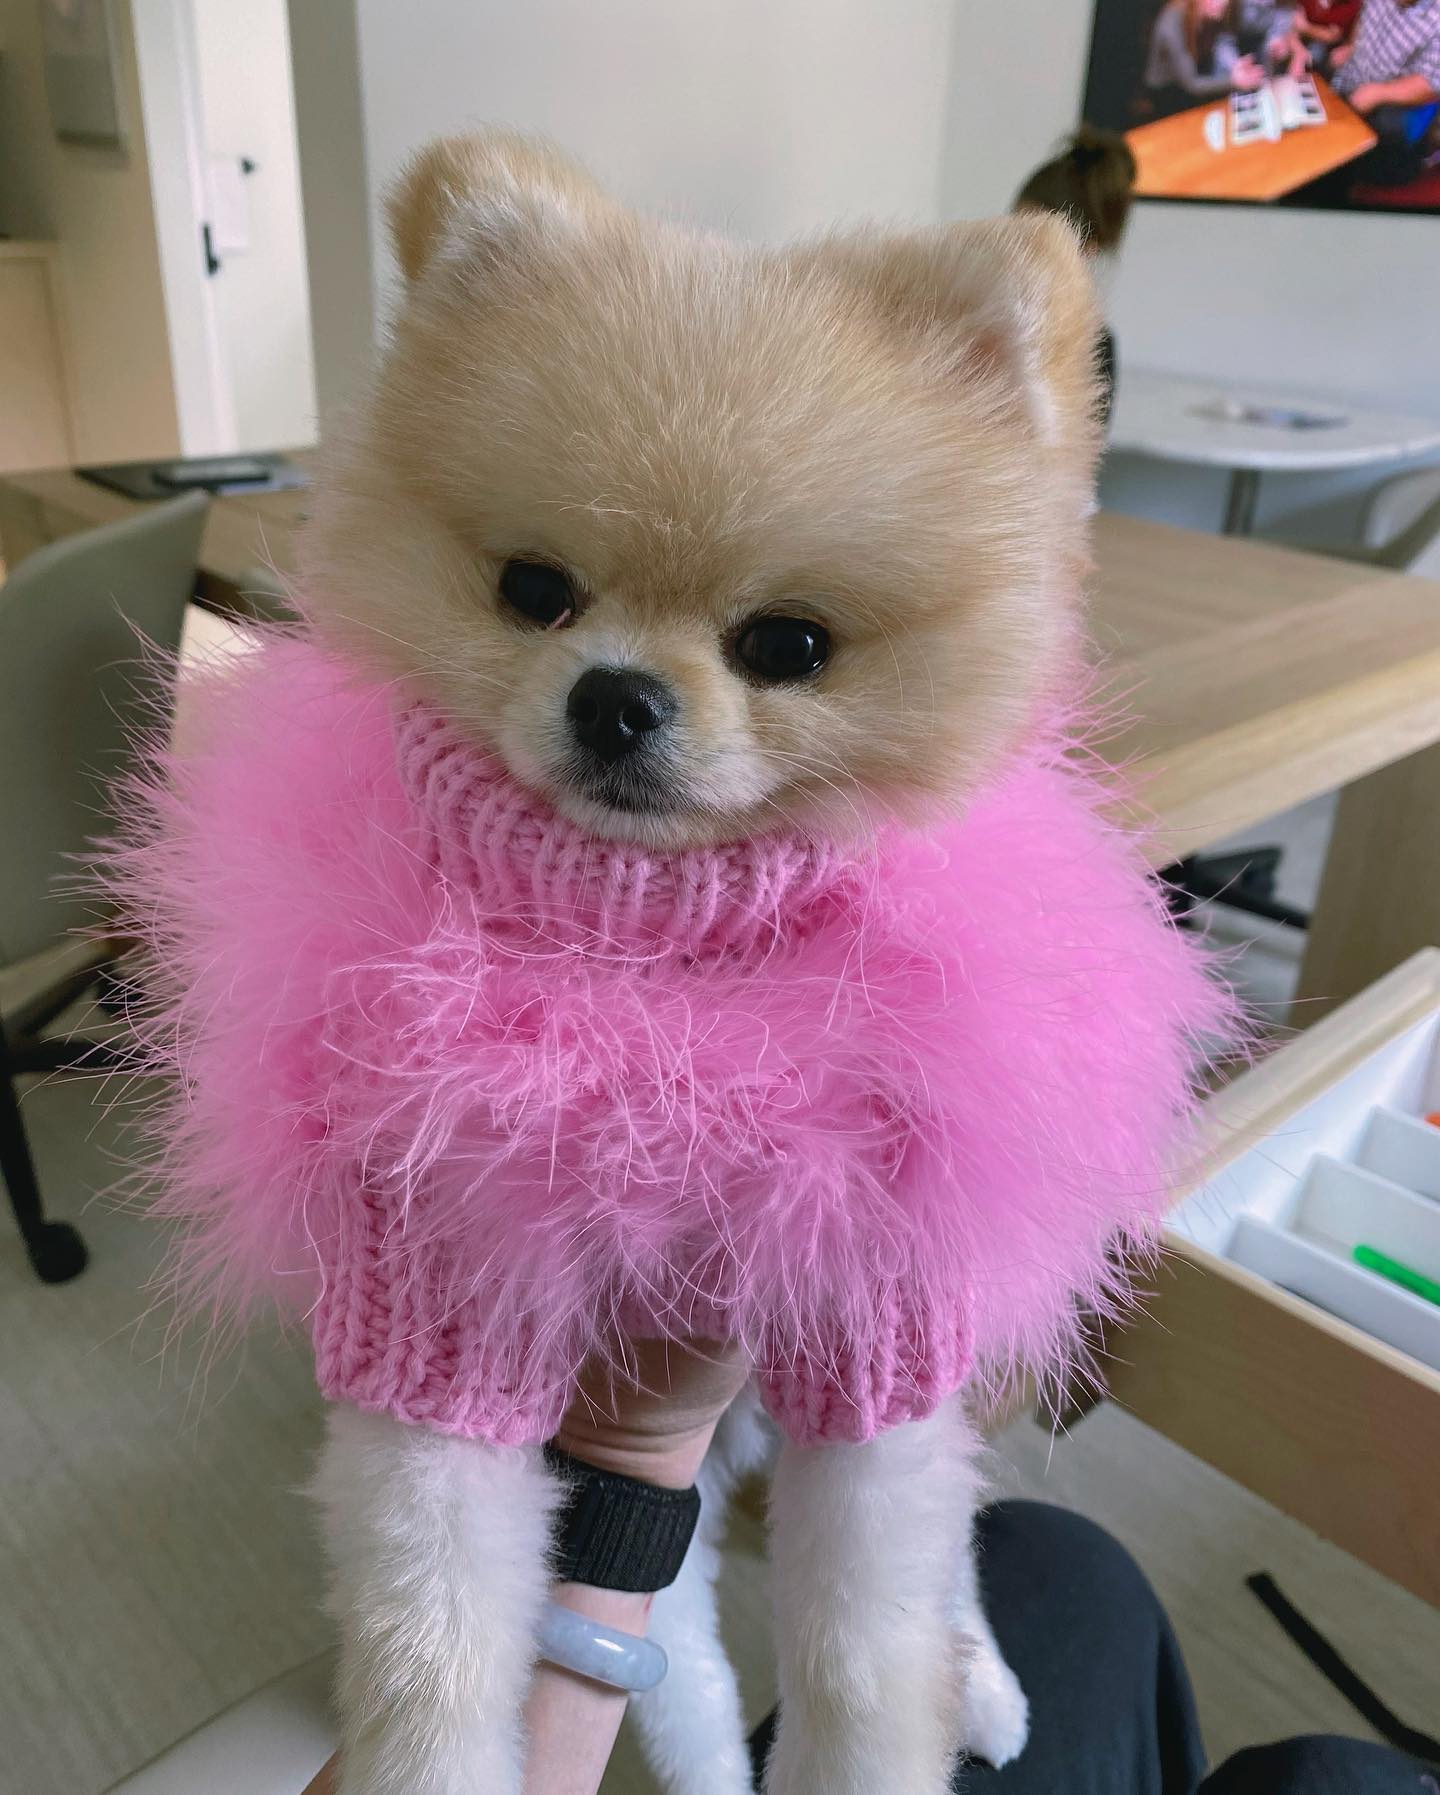 Kim showed off her dog Sushi in a feathered frock